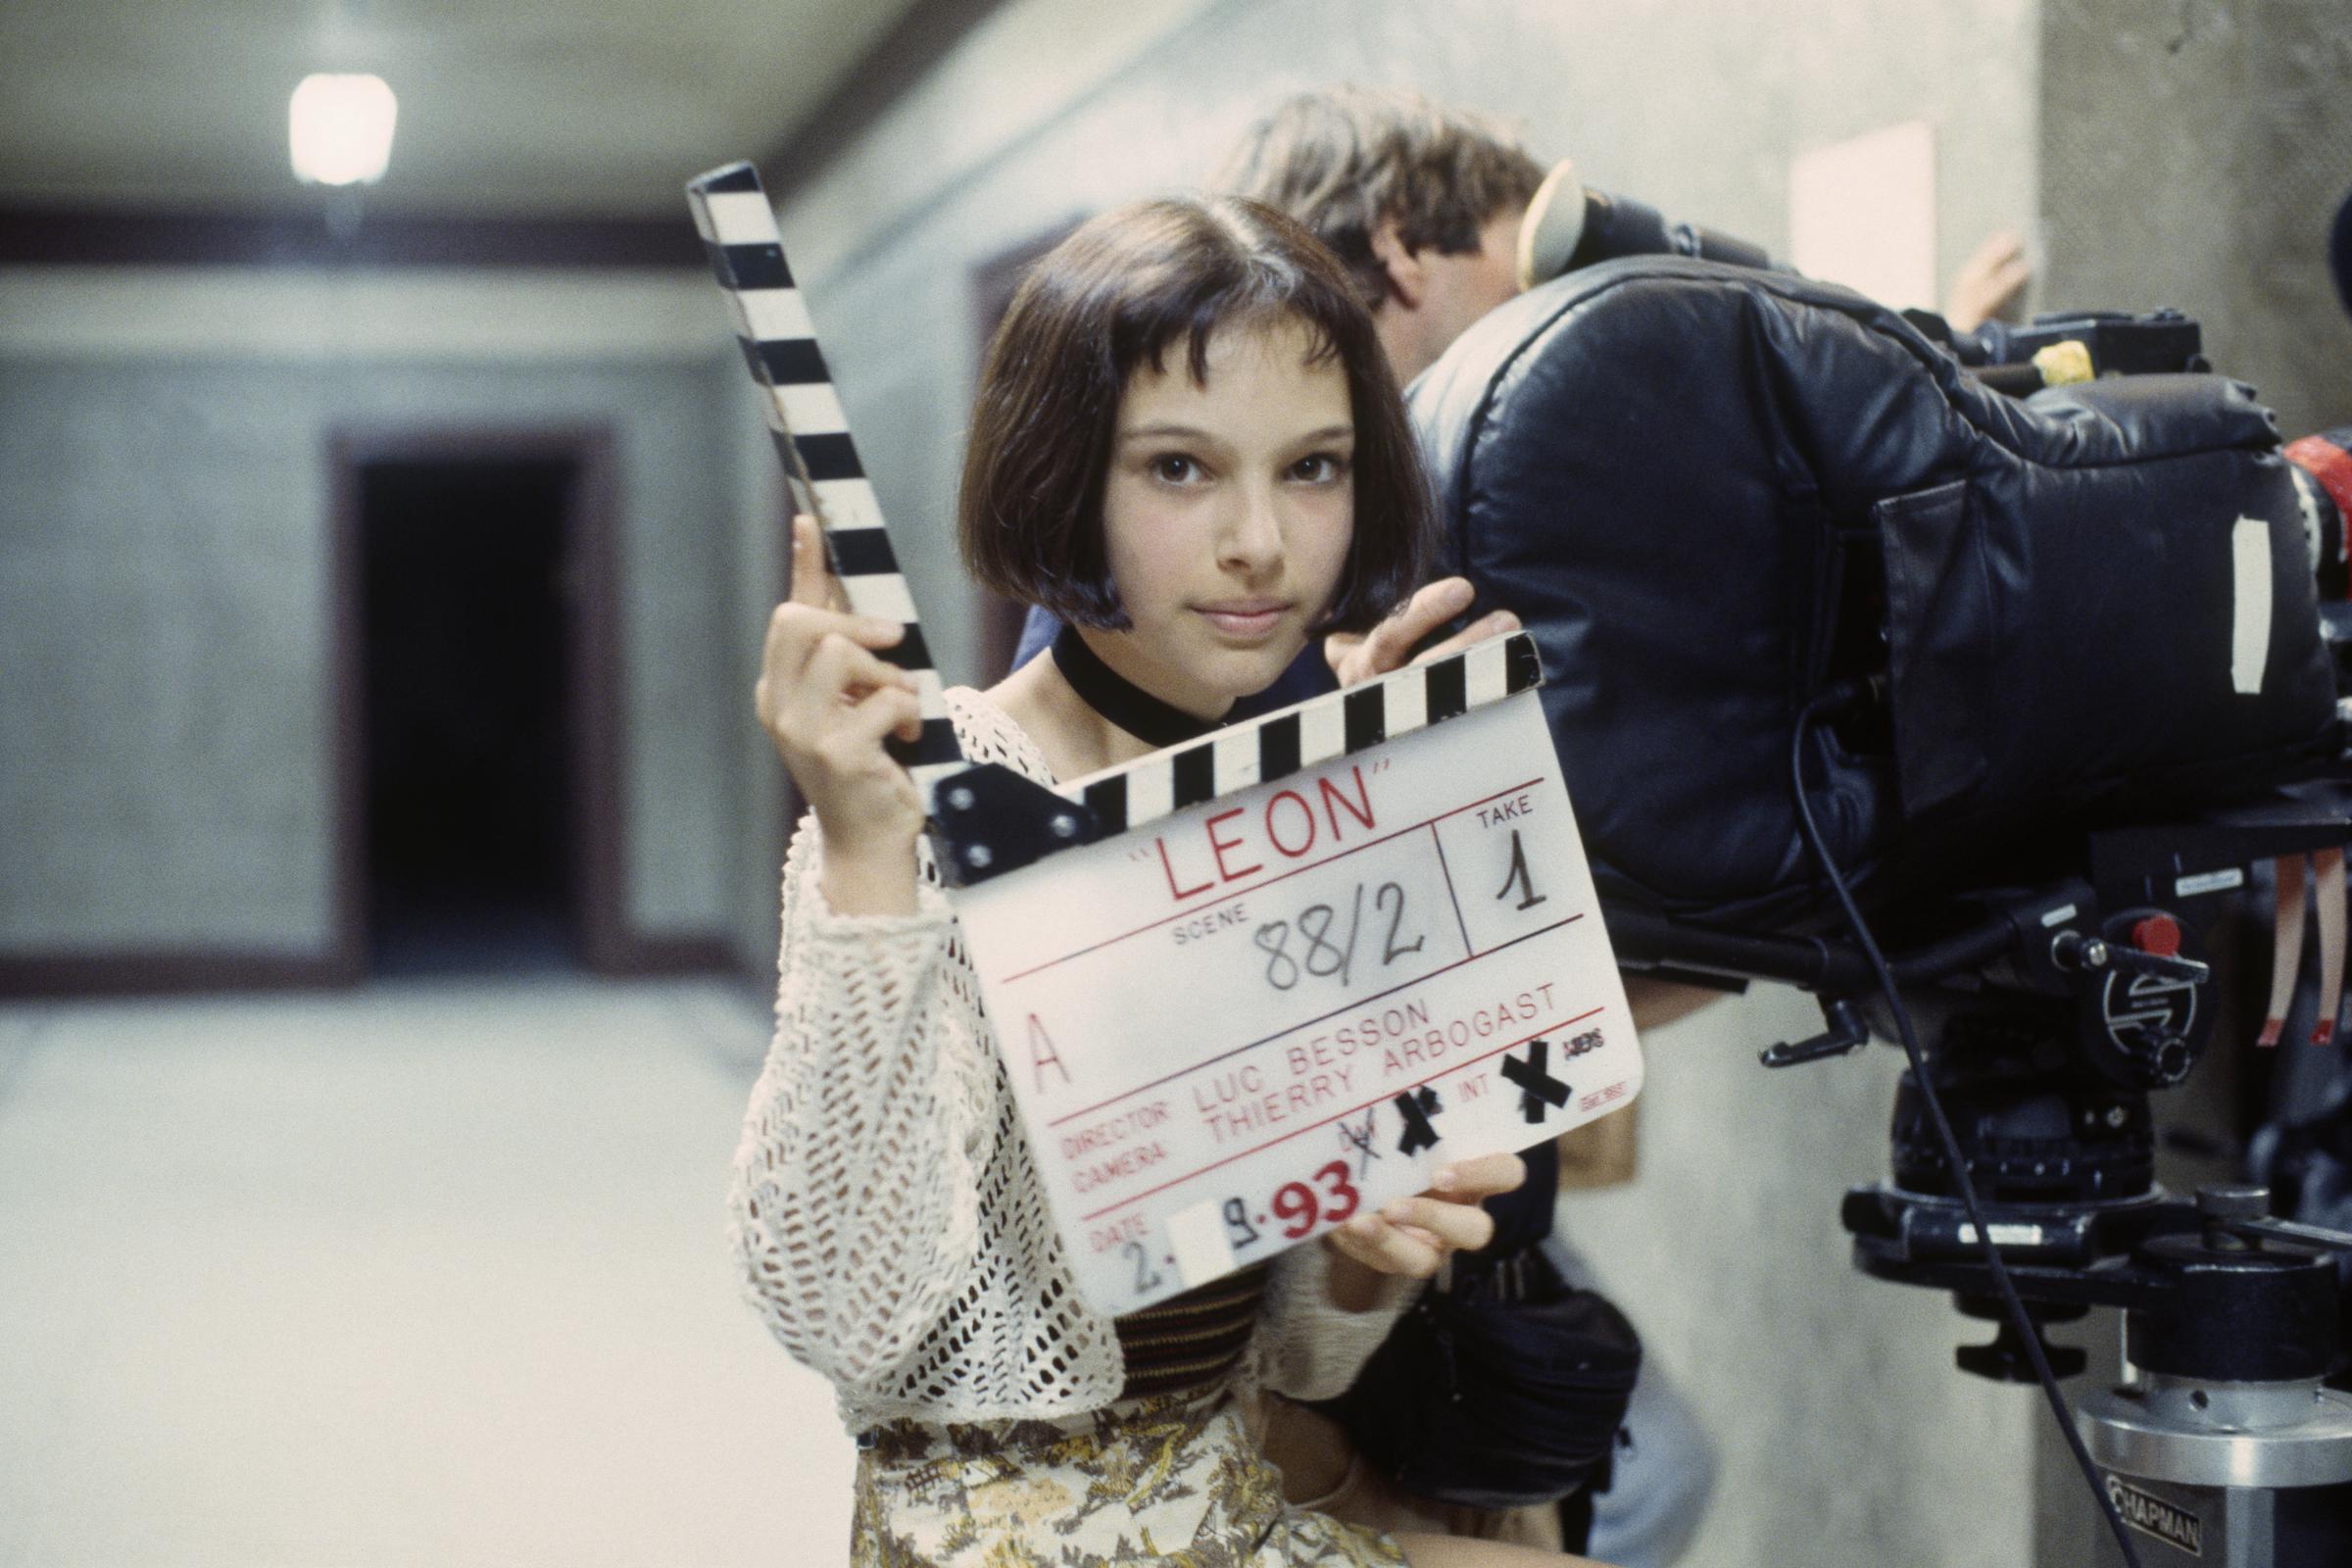 Natalie Portman on the set of the film "Leon", directed by Luc Besson in 1994. | Source: Getty Images